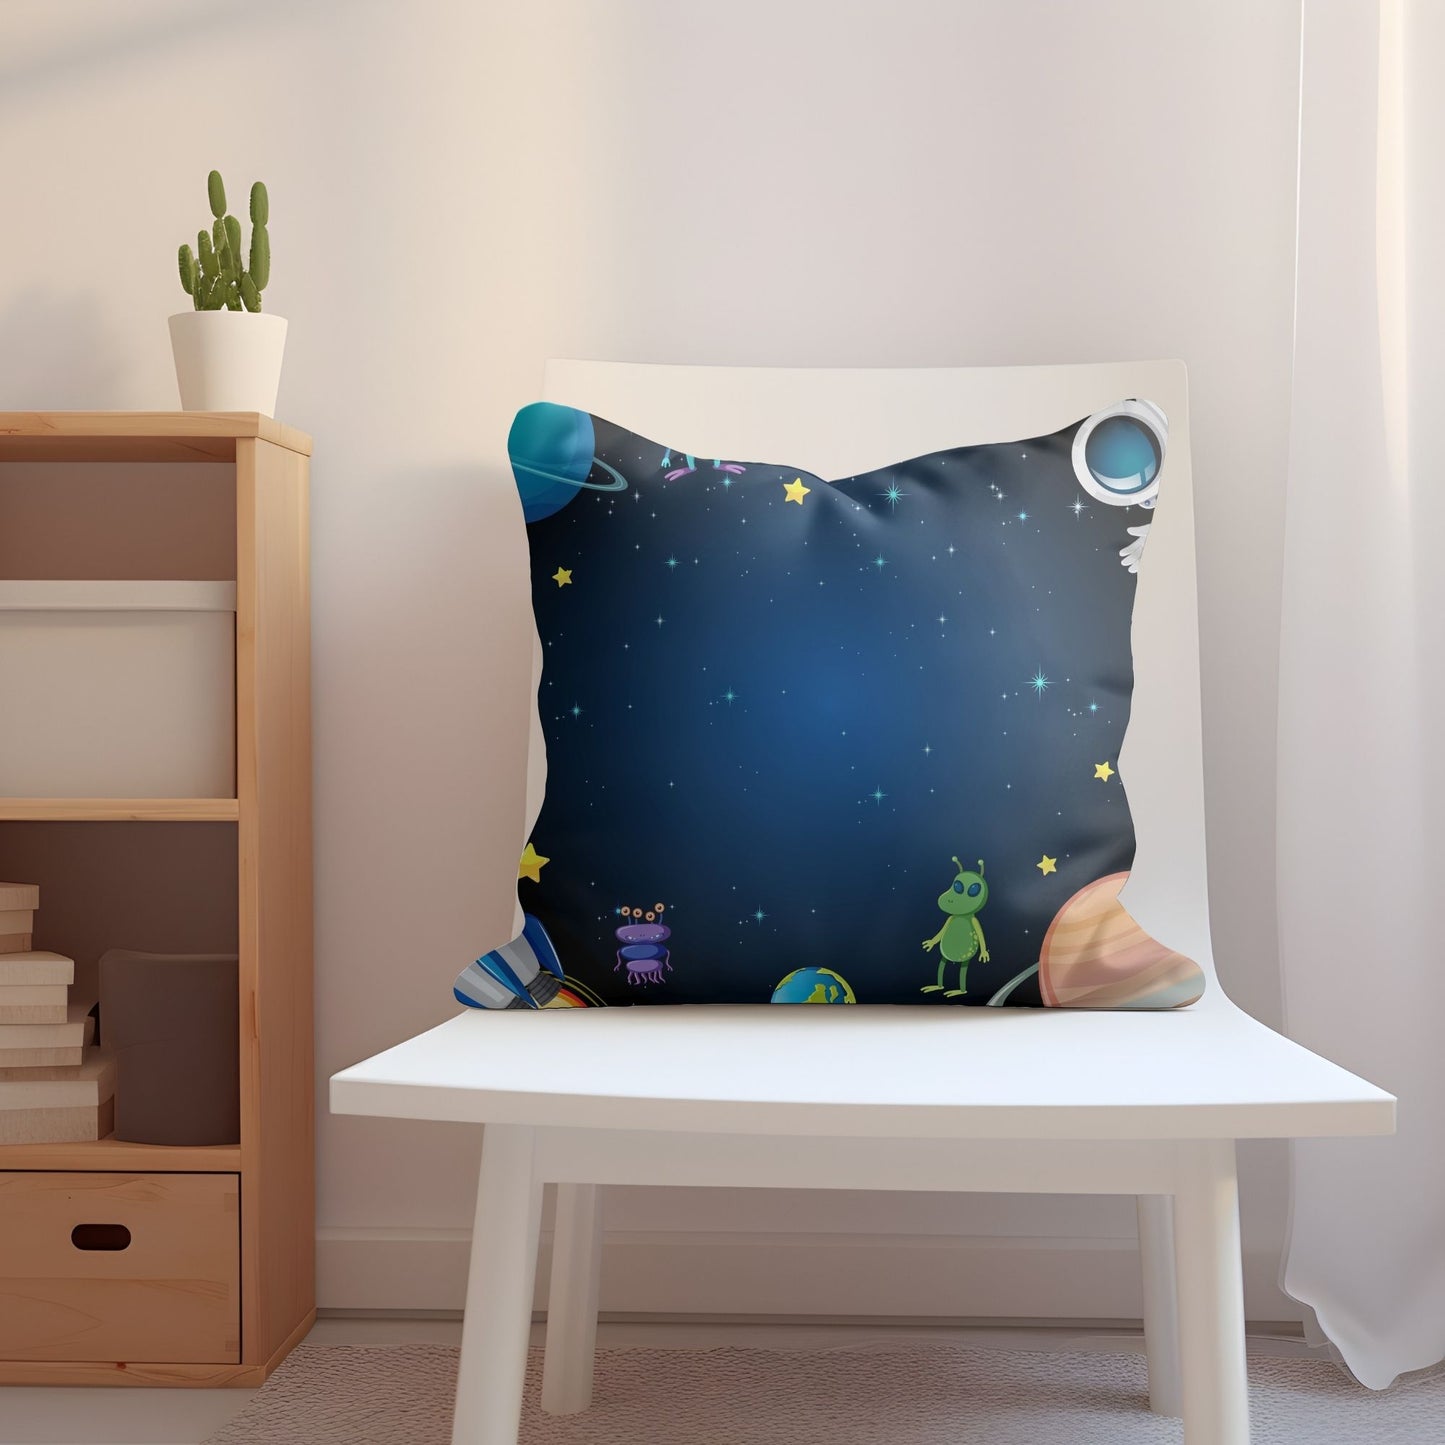 Cozy pillow with a delightful aliens pattern for children's comfort.